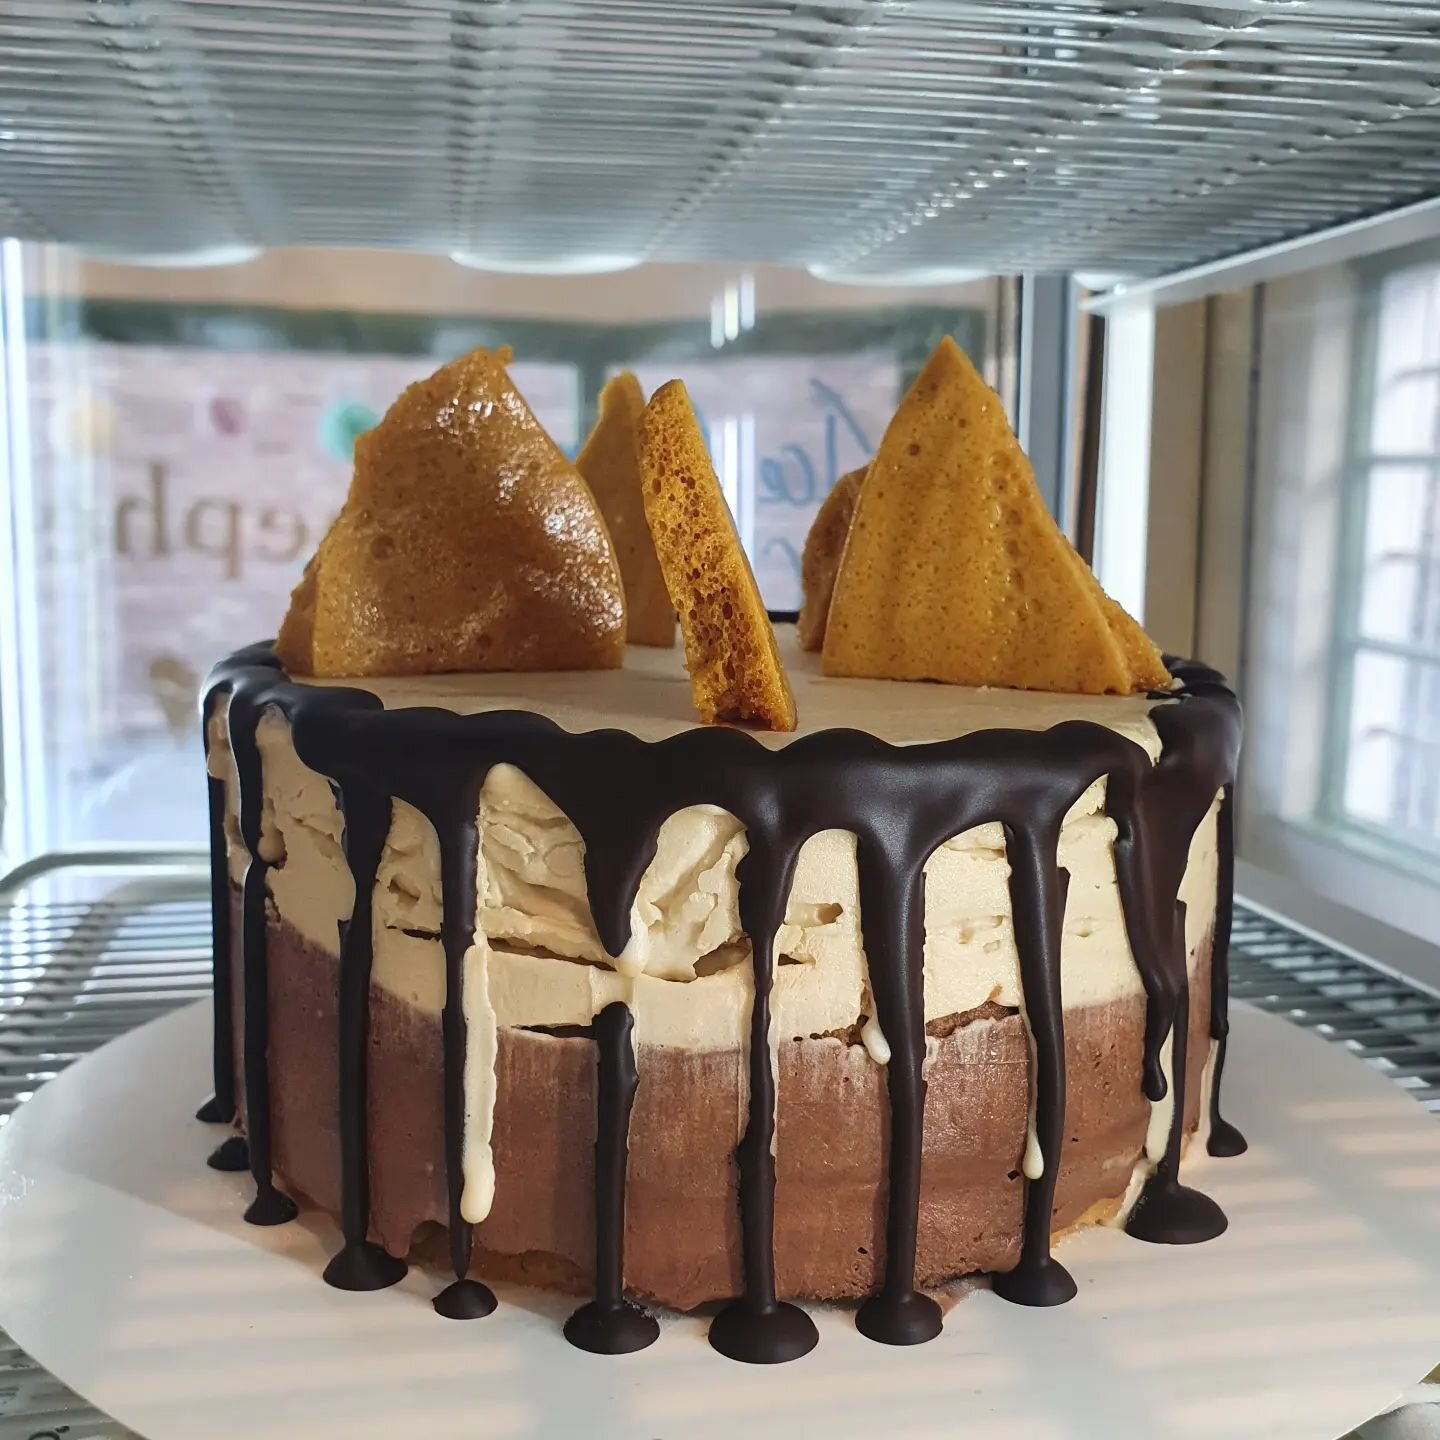 Ice cream cakes! Now that we are back open we can make your ice cream cakes again. Ideally give us a week's notice, come into the shop or give us a call and we can go through flavour options with you. 

But if you need something straight away we migh